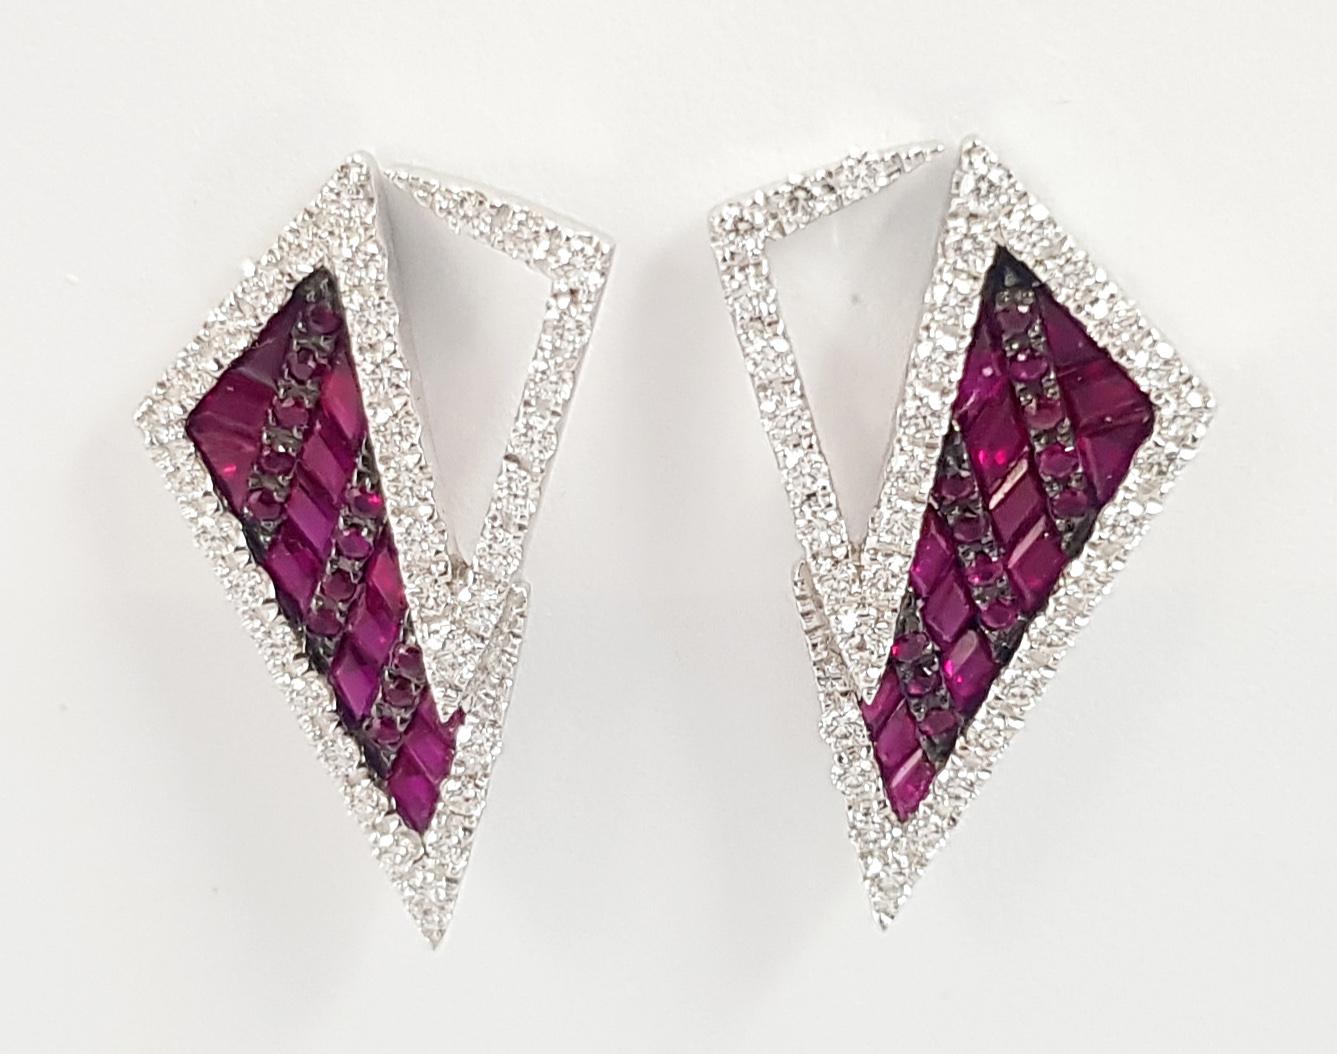 Ruby 2.71 carats with Diamond 0.20 carat Earrings set in 18K White Gold Settings

Width: 1.5 cm
Length: 2.6 cm
Weight: 7.92 grams

The ancient Japanese tradition of paper folding has inspired the form and elements of this modern collection. With a